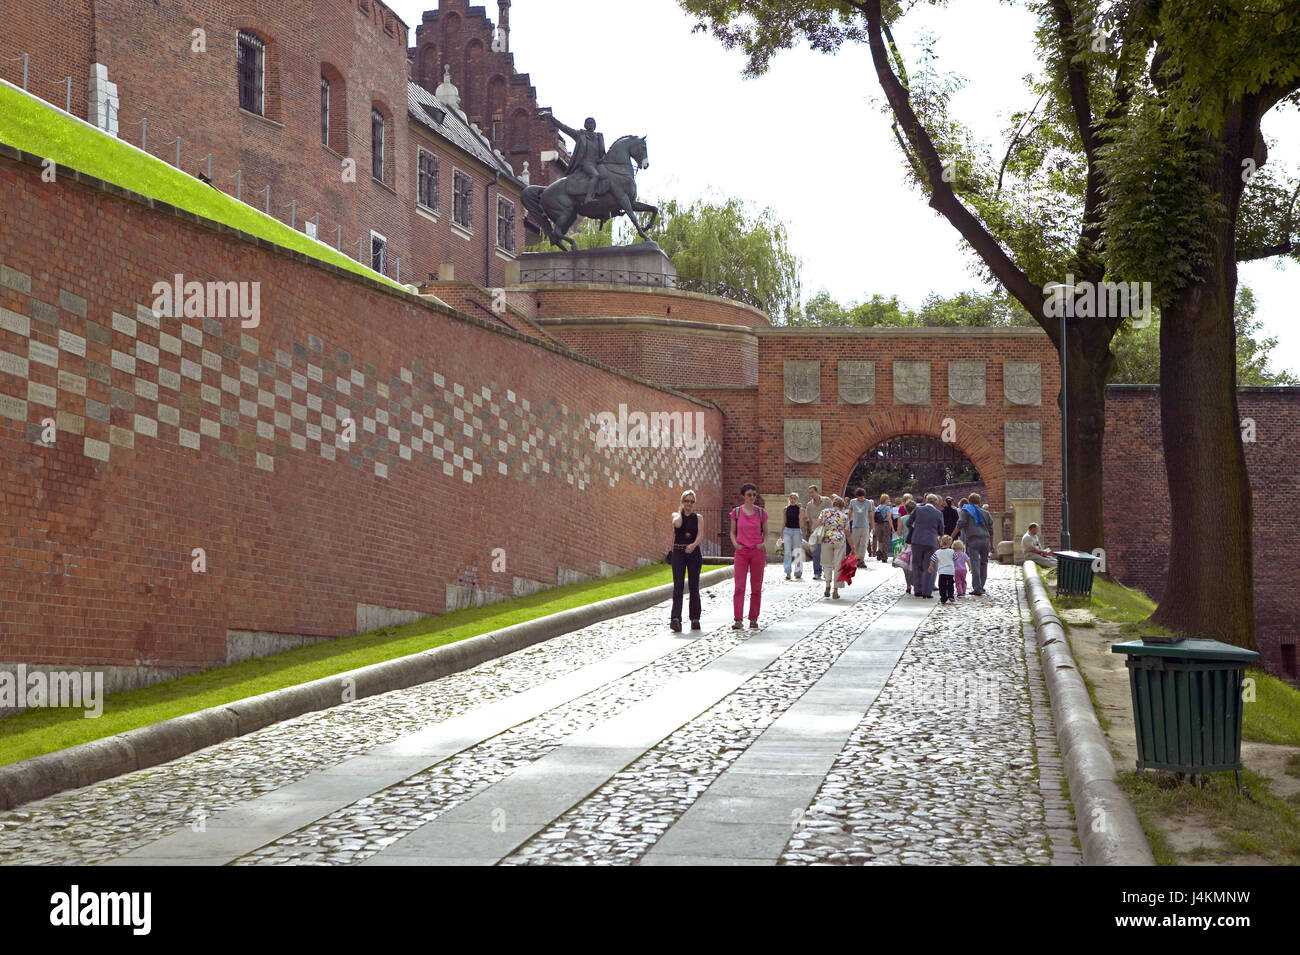 Poland, Cracow, Wawel, lock, defensive wall, visitor Europe, East Europe, Poland, Rzeczpospolita Polska, Cracow, town, castle mountain, Wawel hill, royal castle, place of interest, culture, tourism, summer, outside, Wawel clay brick, brick walling, statue, equestrian statue, monument Stock Photo